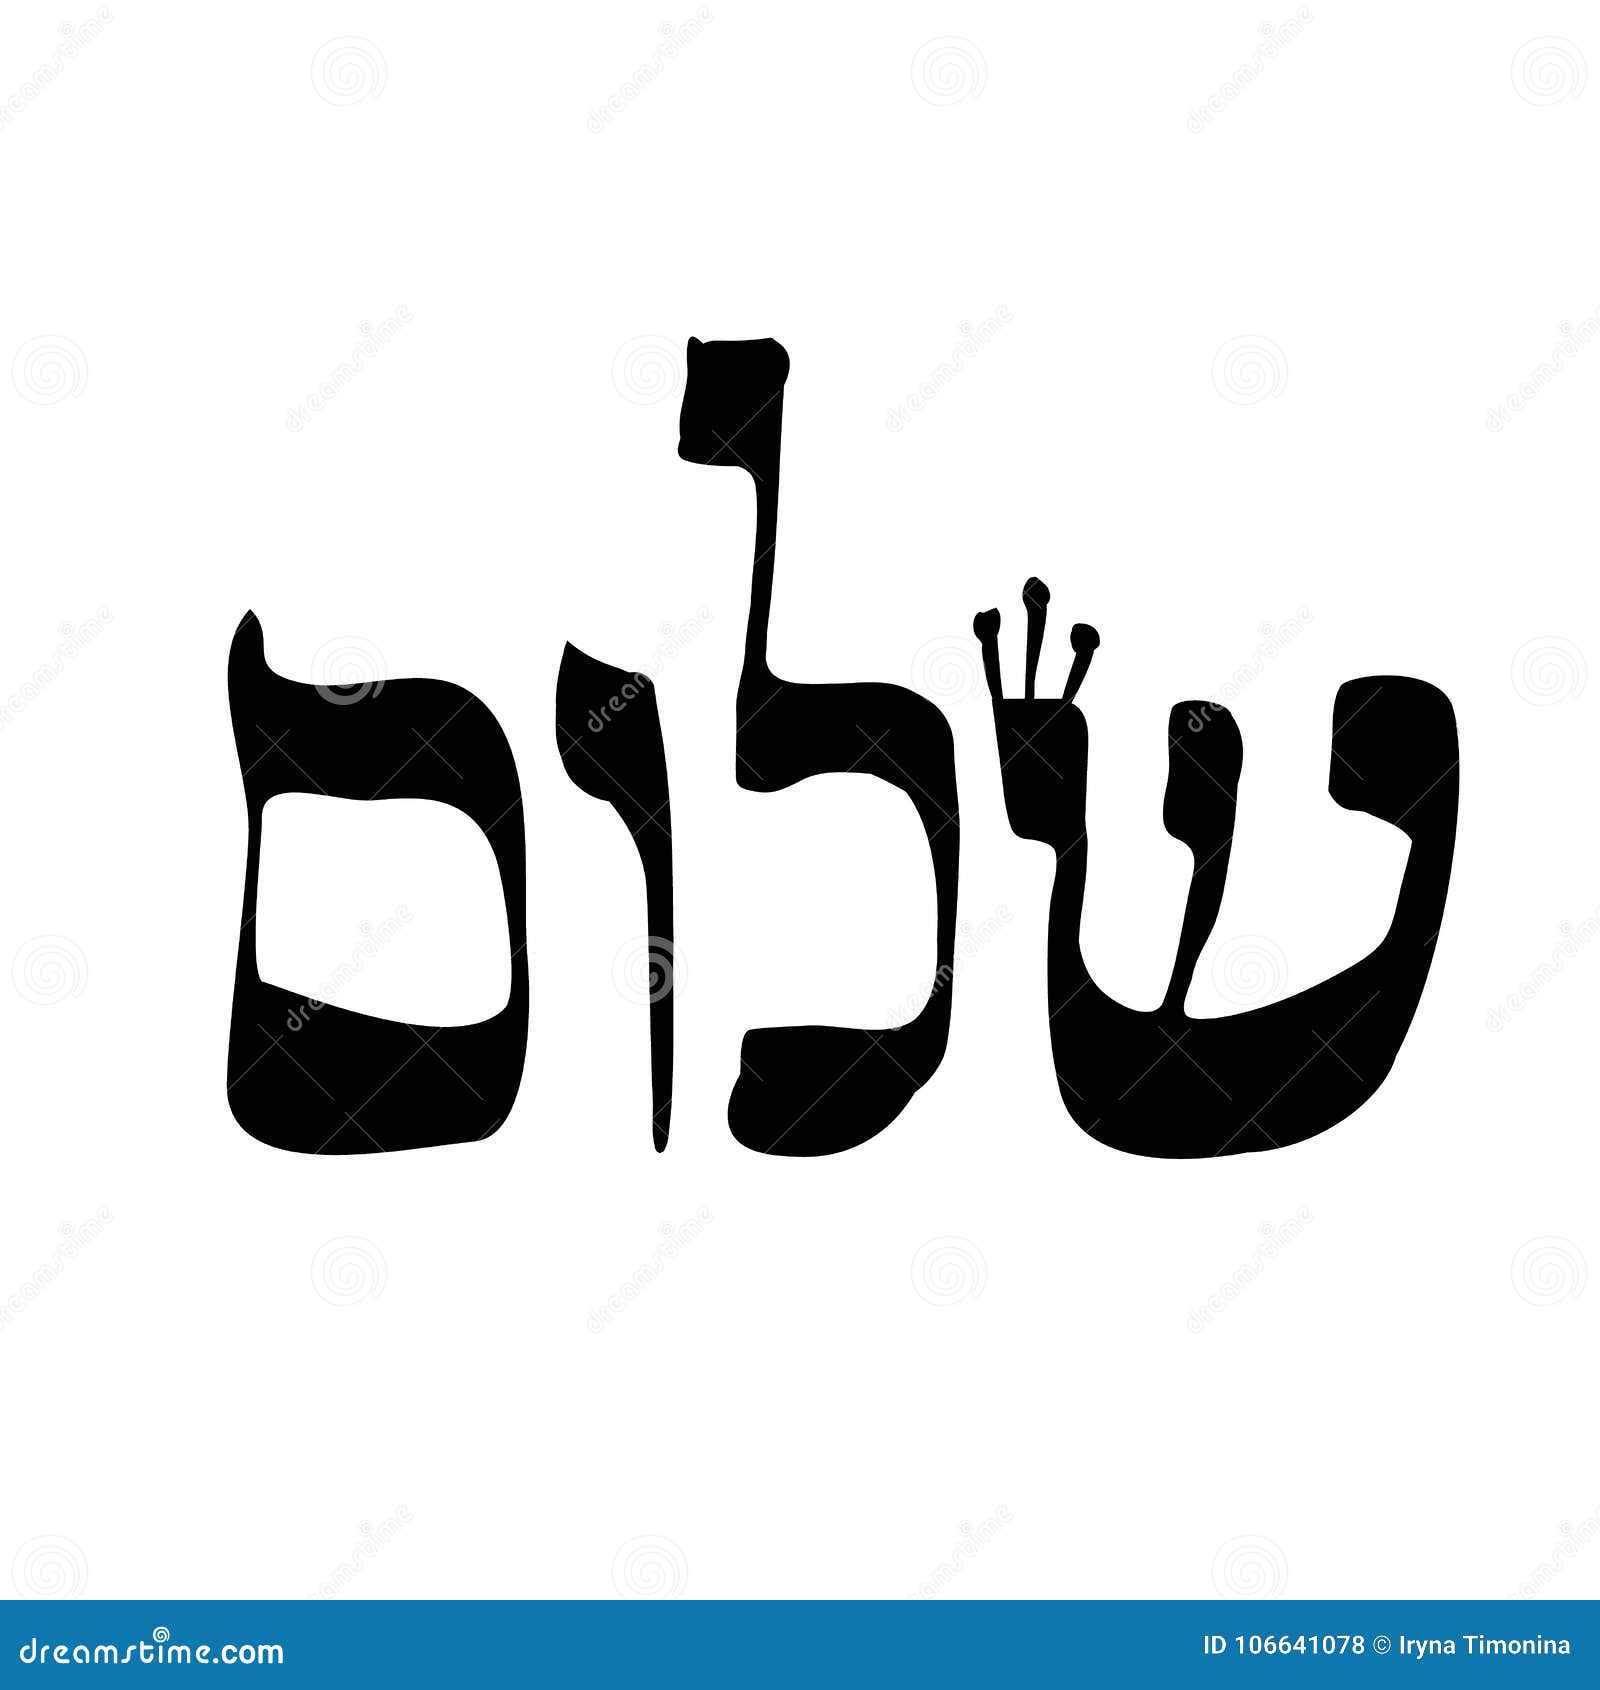 Christian Gift with Hebrew word Shalom and its meanings | Greeting Card